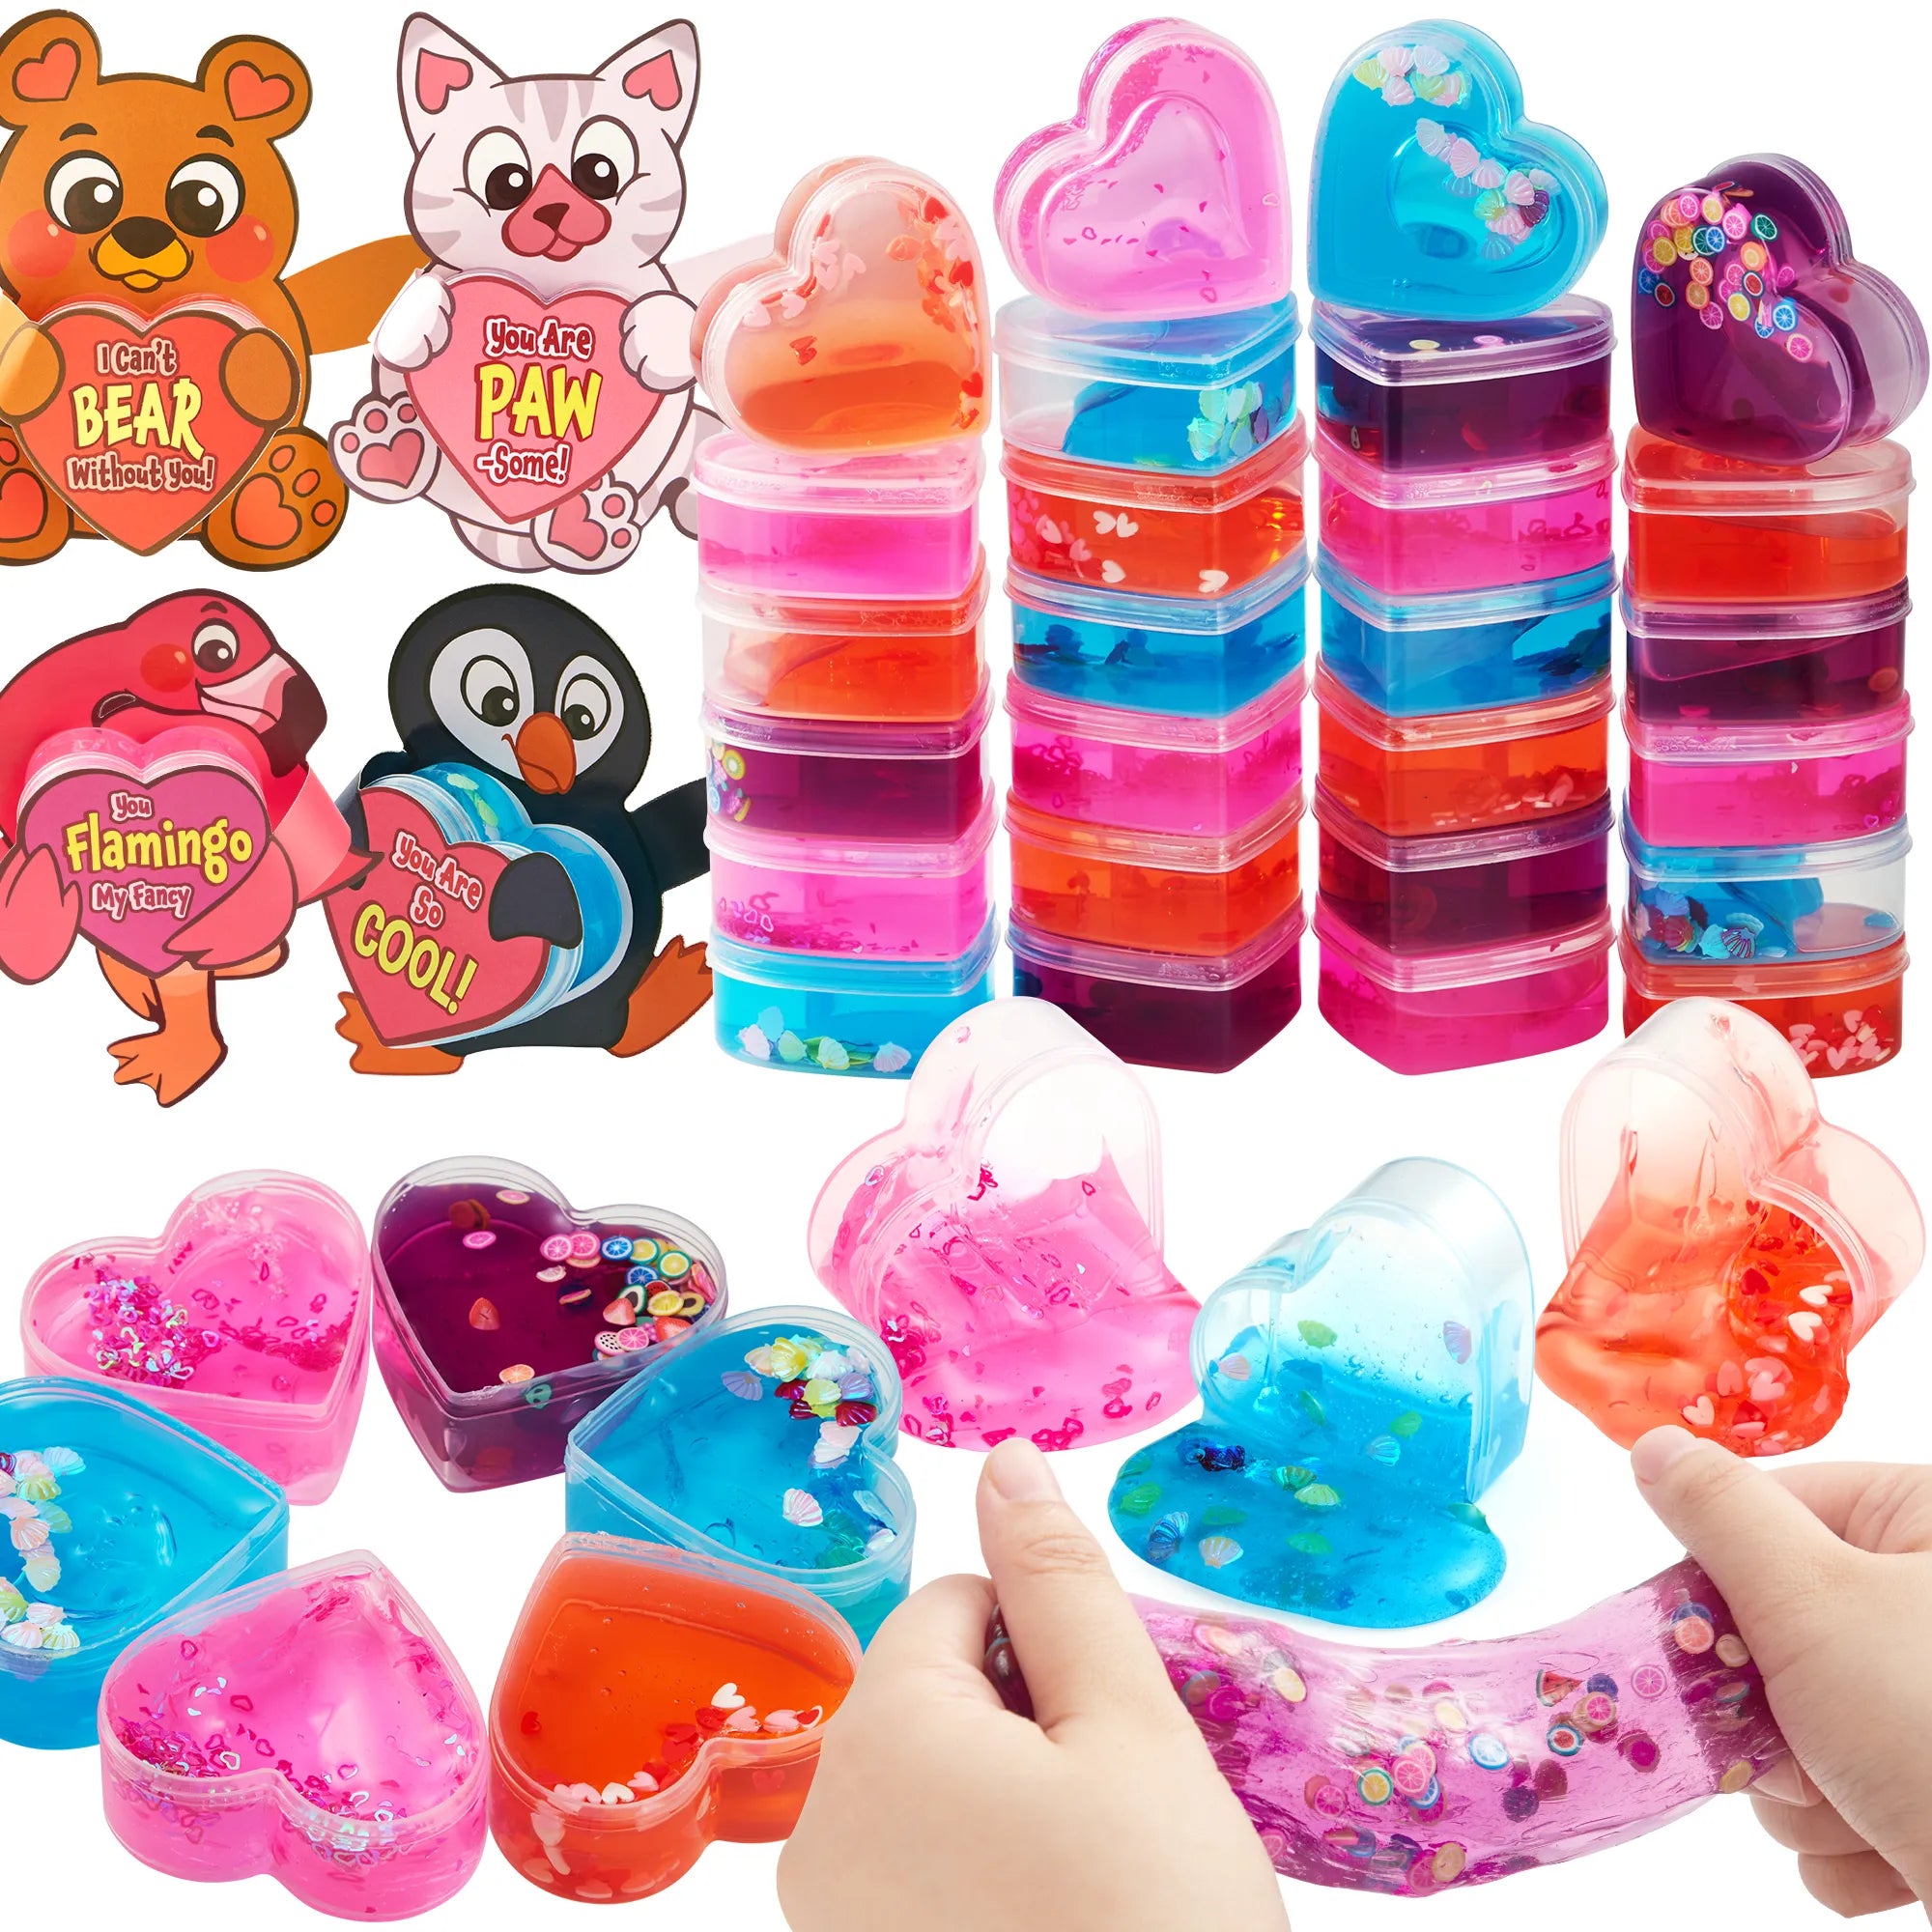 Top Quality 24pcs Valentines Squishy Bear Toy with Cards